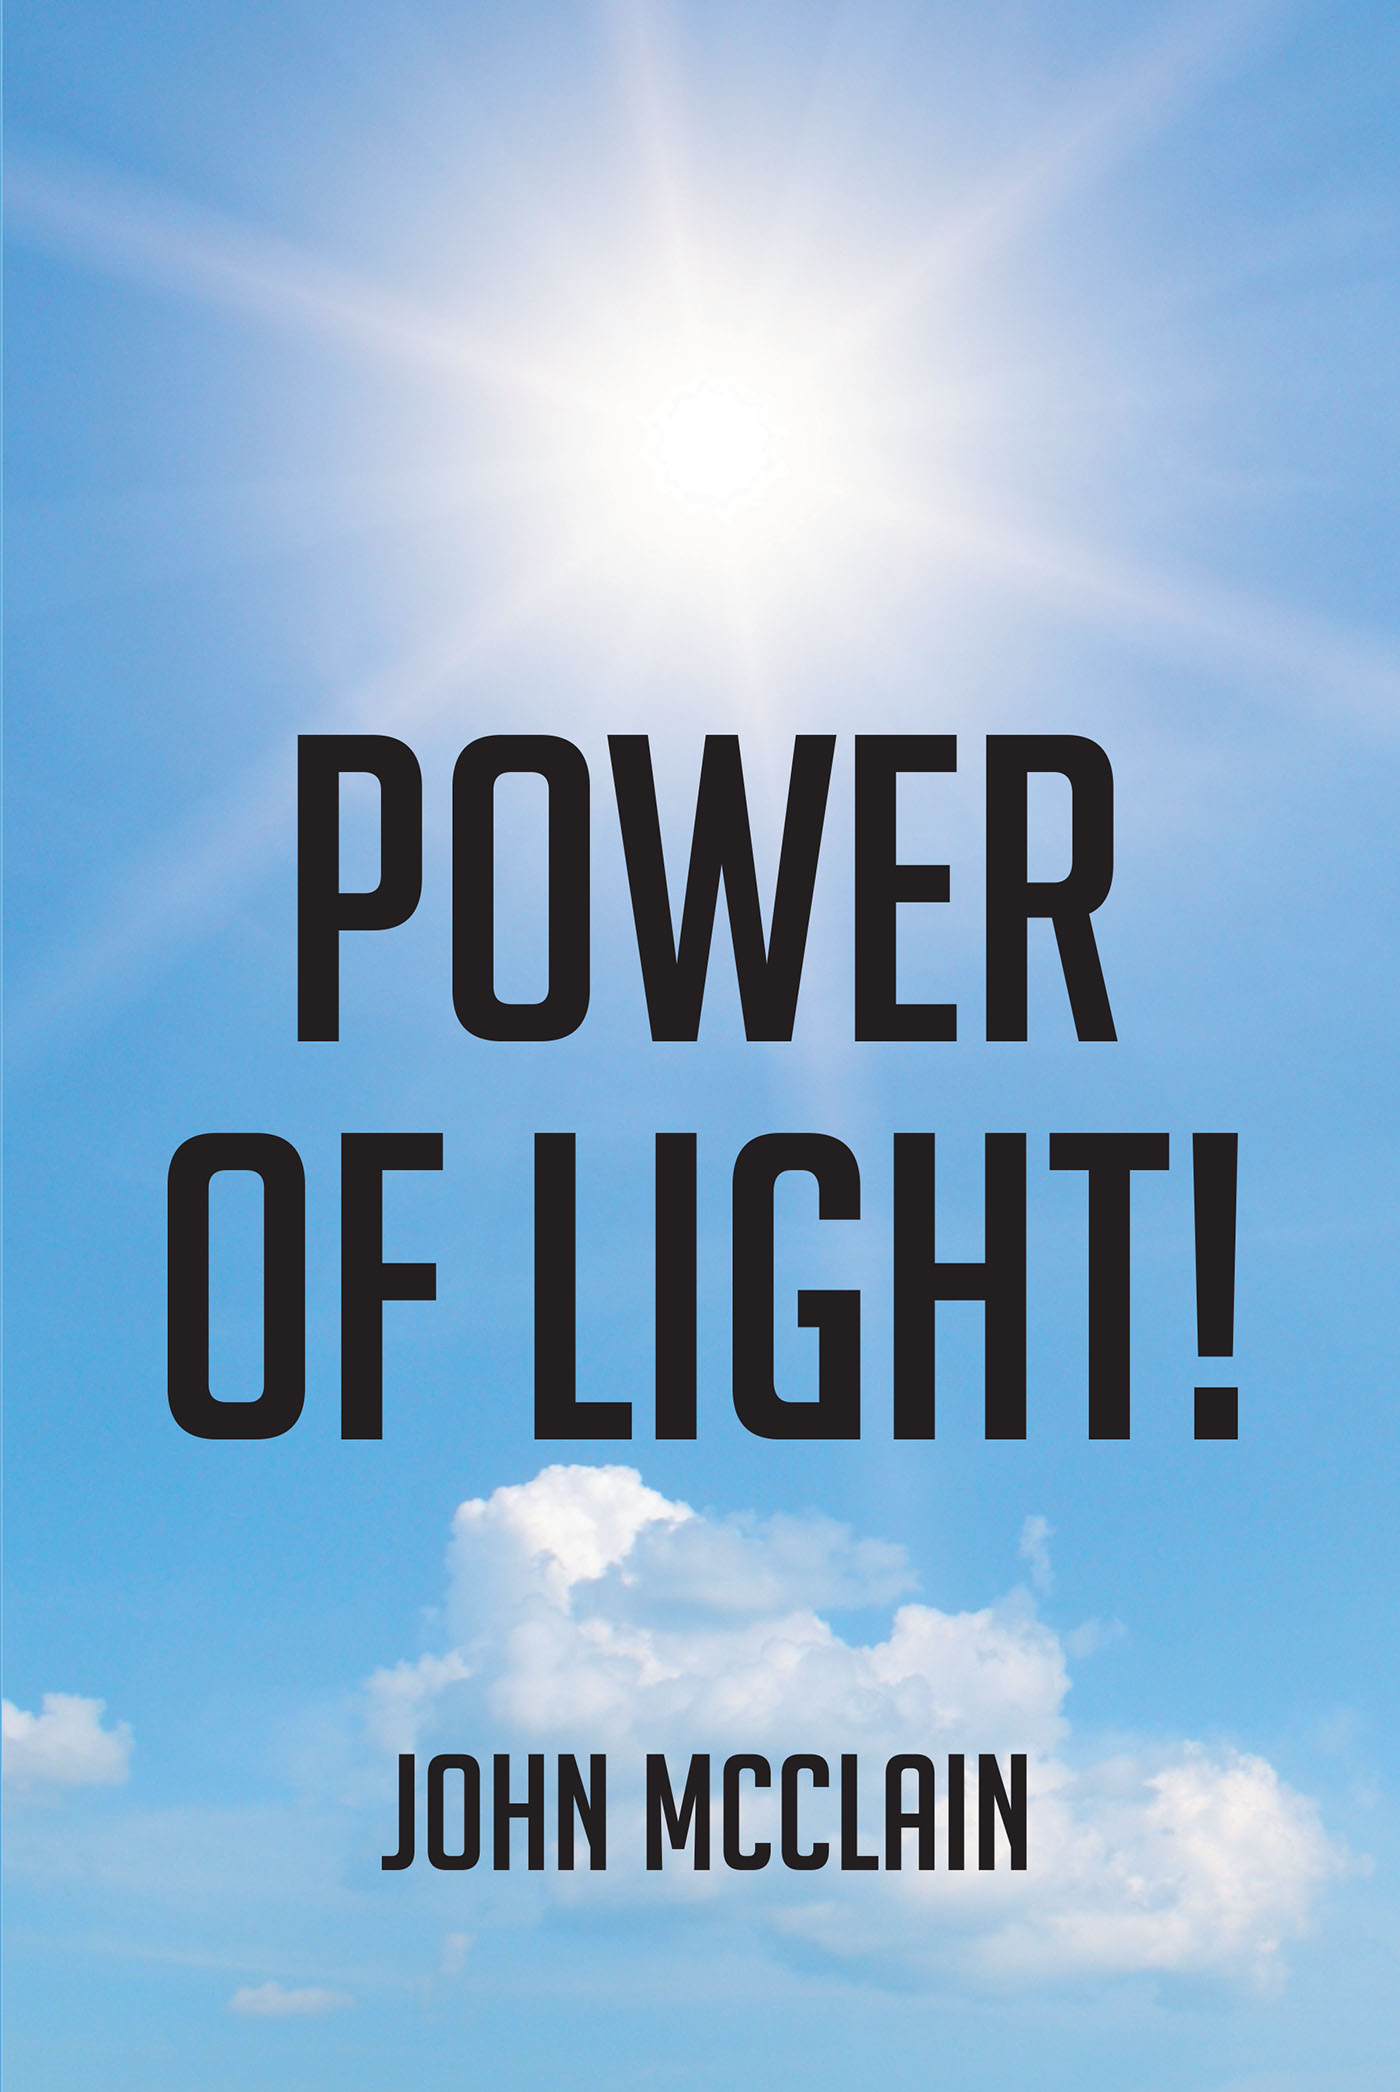 Author John McClain’s New Book “Power of Light!” Follows One Man's Journey to Defend His Soul Against Forces That Would Otherwise Tear Him from the Lord and Salvation